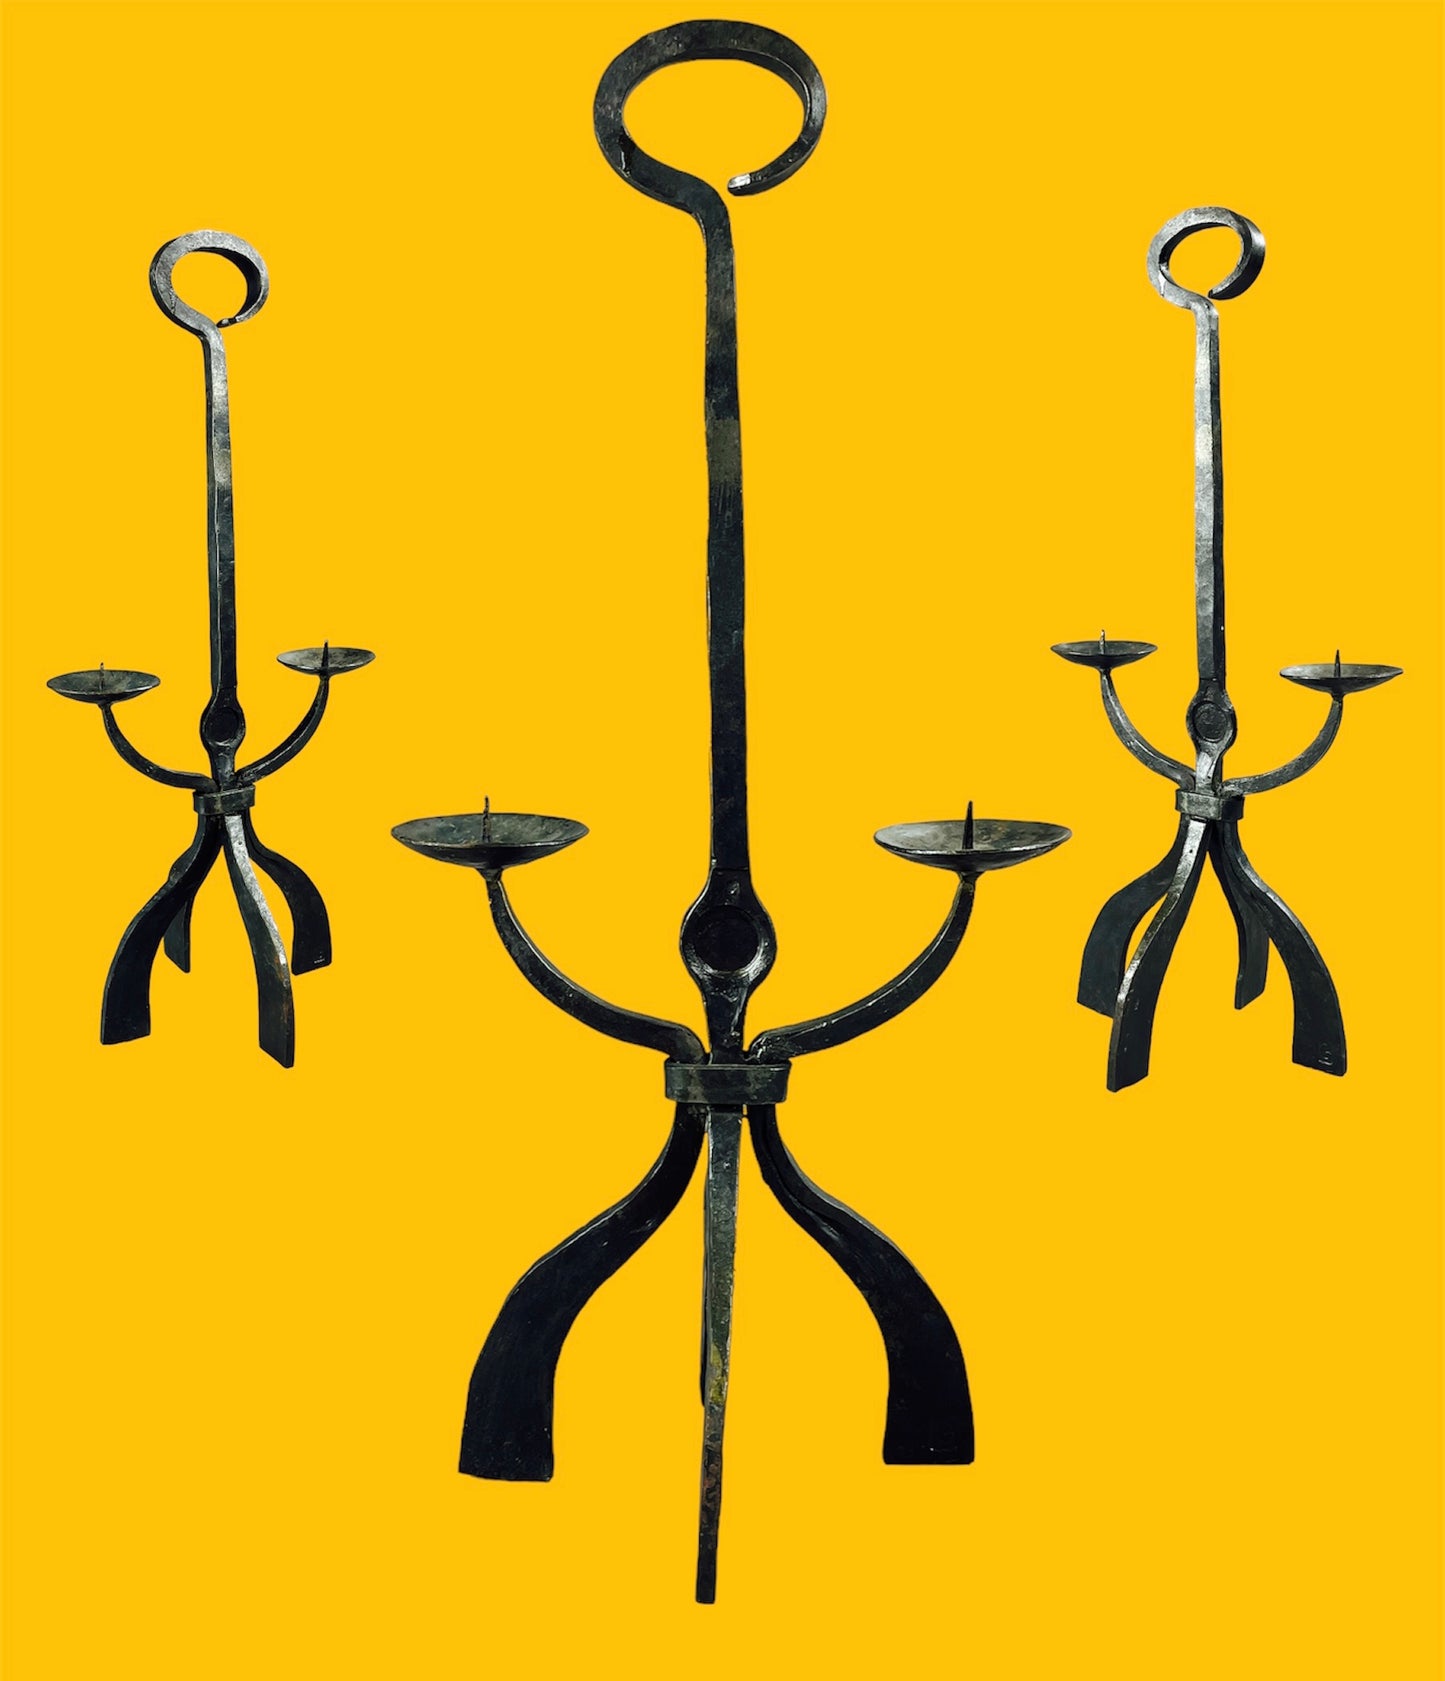 Wrought iron double candelabra with four legs and a top handle